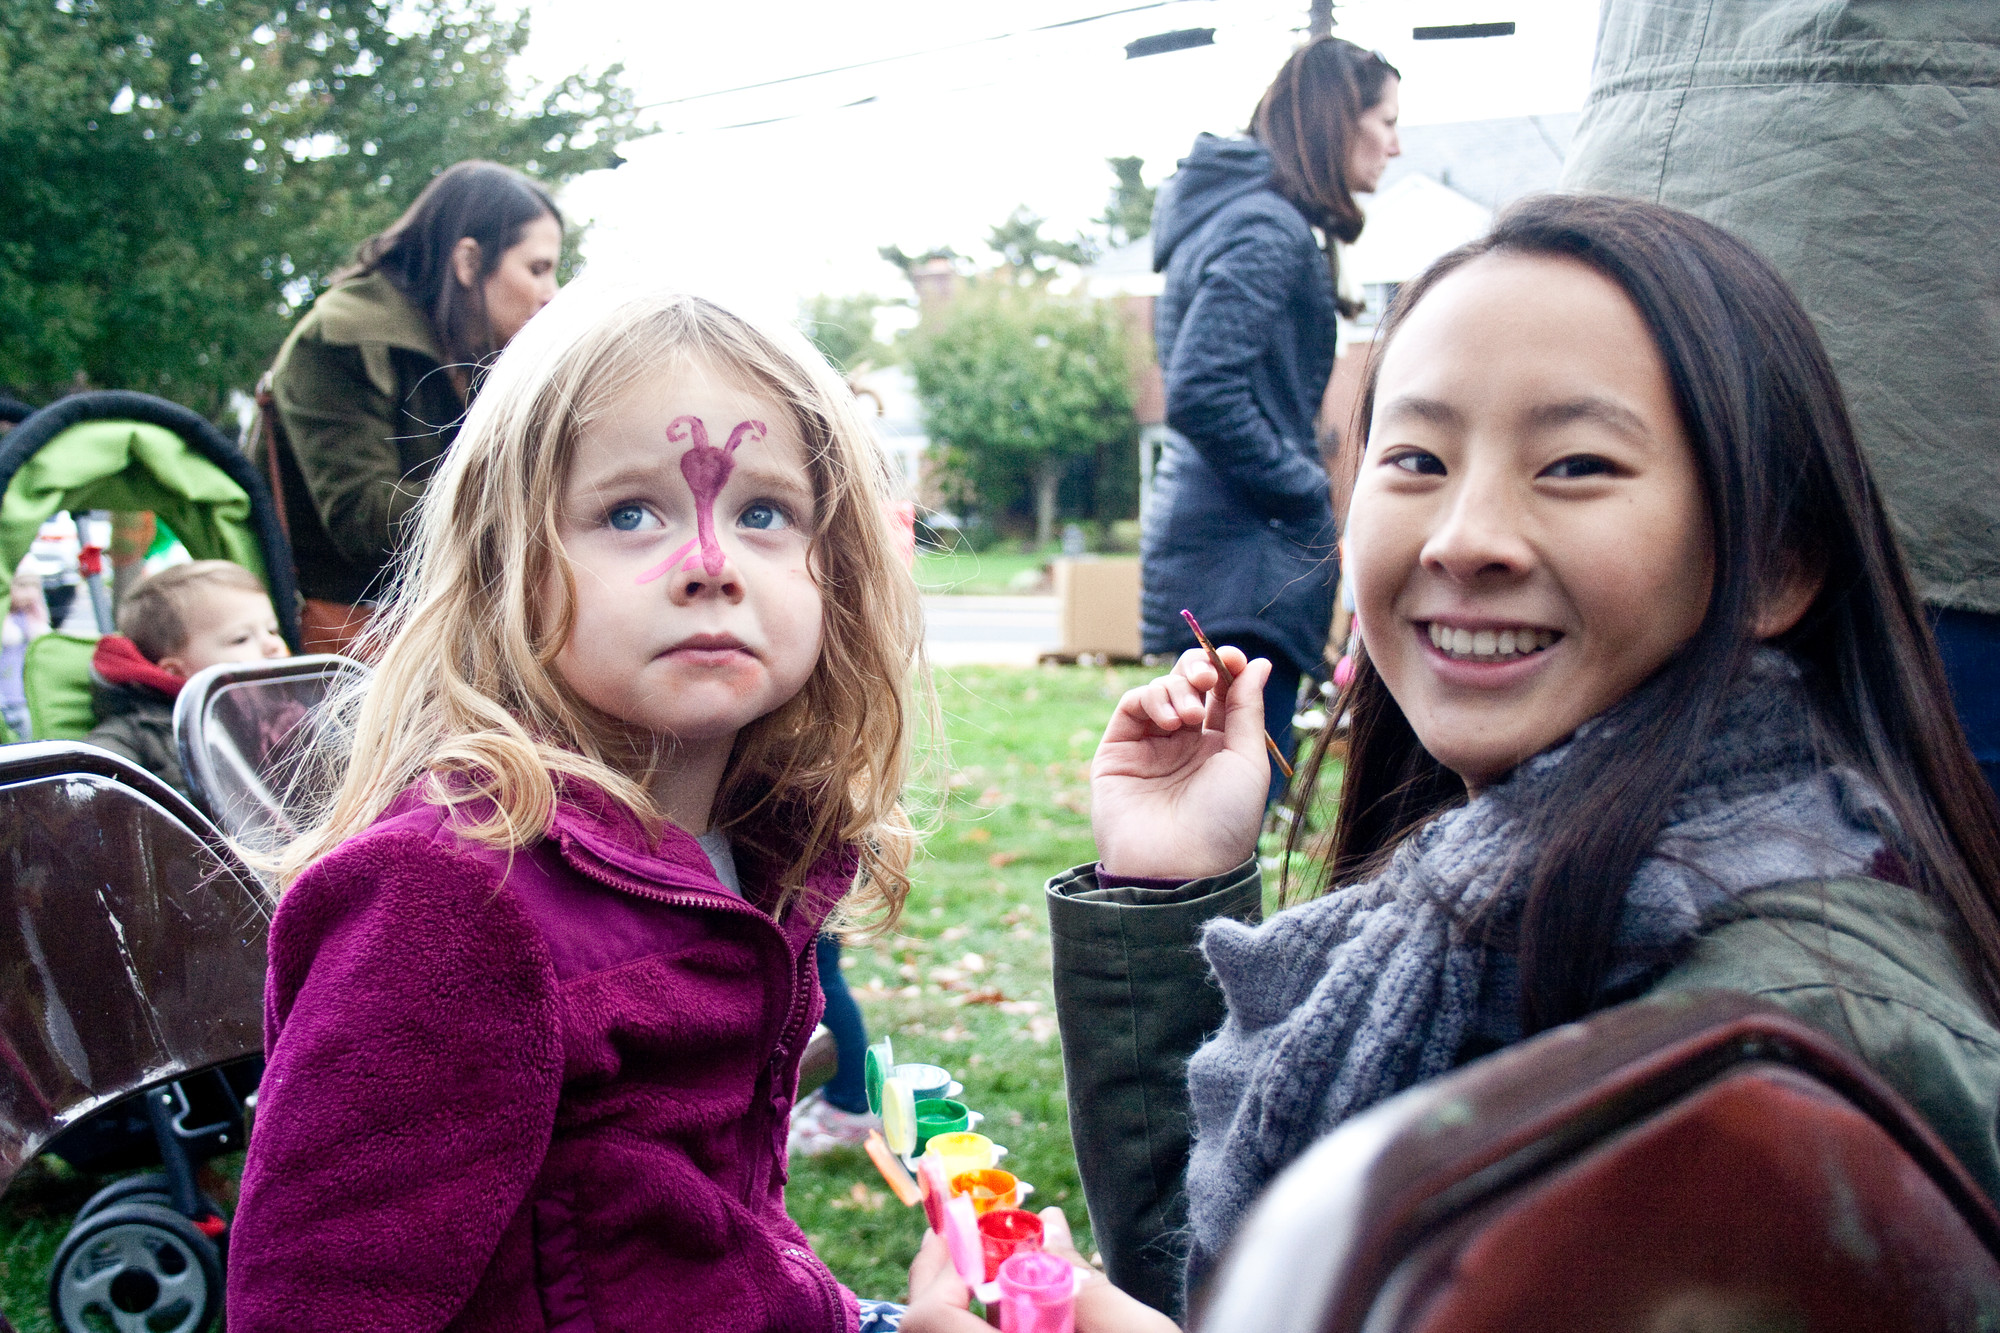 Liana Lo painted a butterfly on the face of Devin Mullaney, 3.